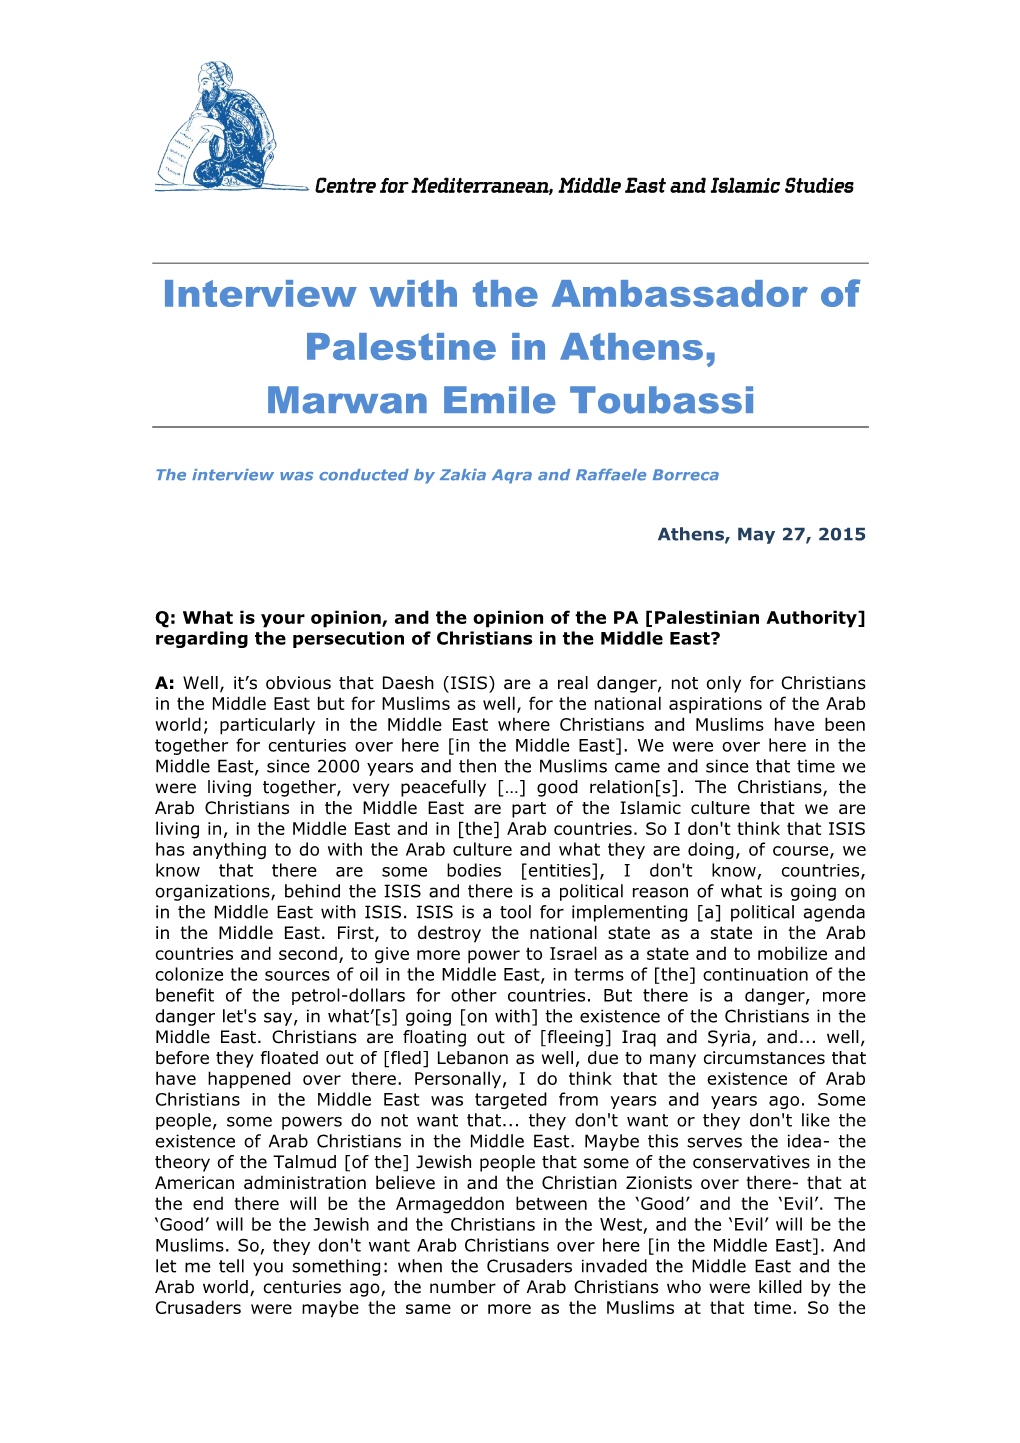 Interview with the Ambassador of Palestine in Athens, Marwan Emile Toubassi